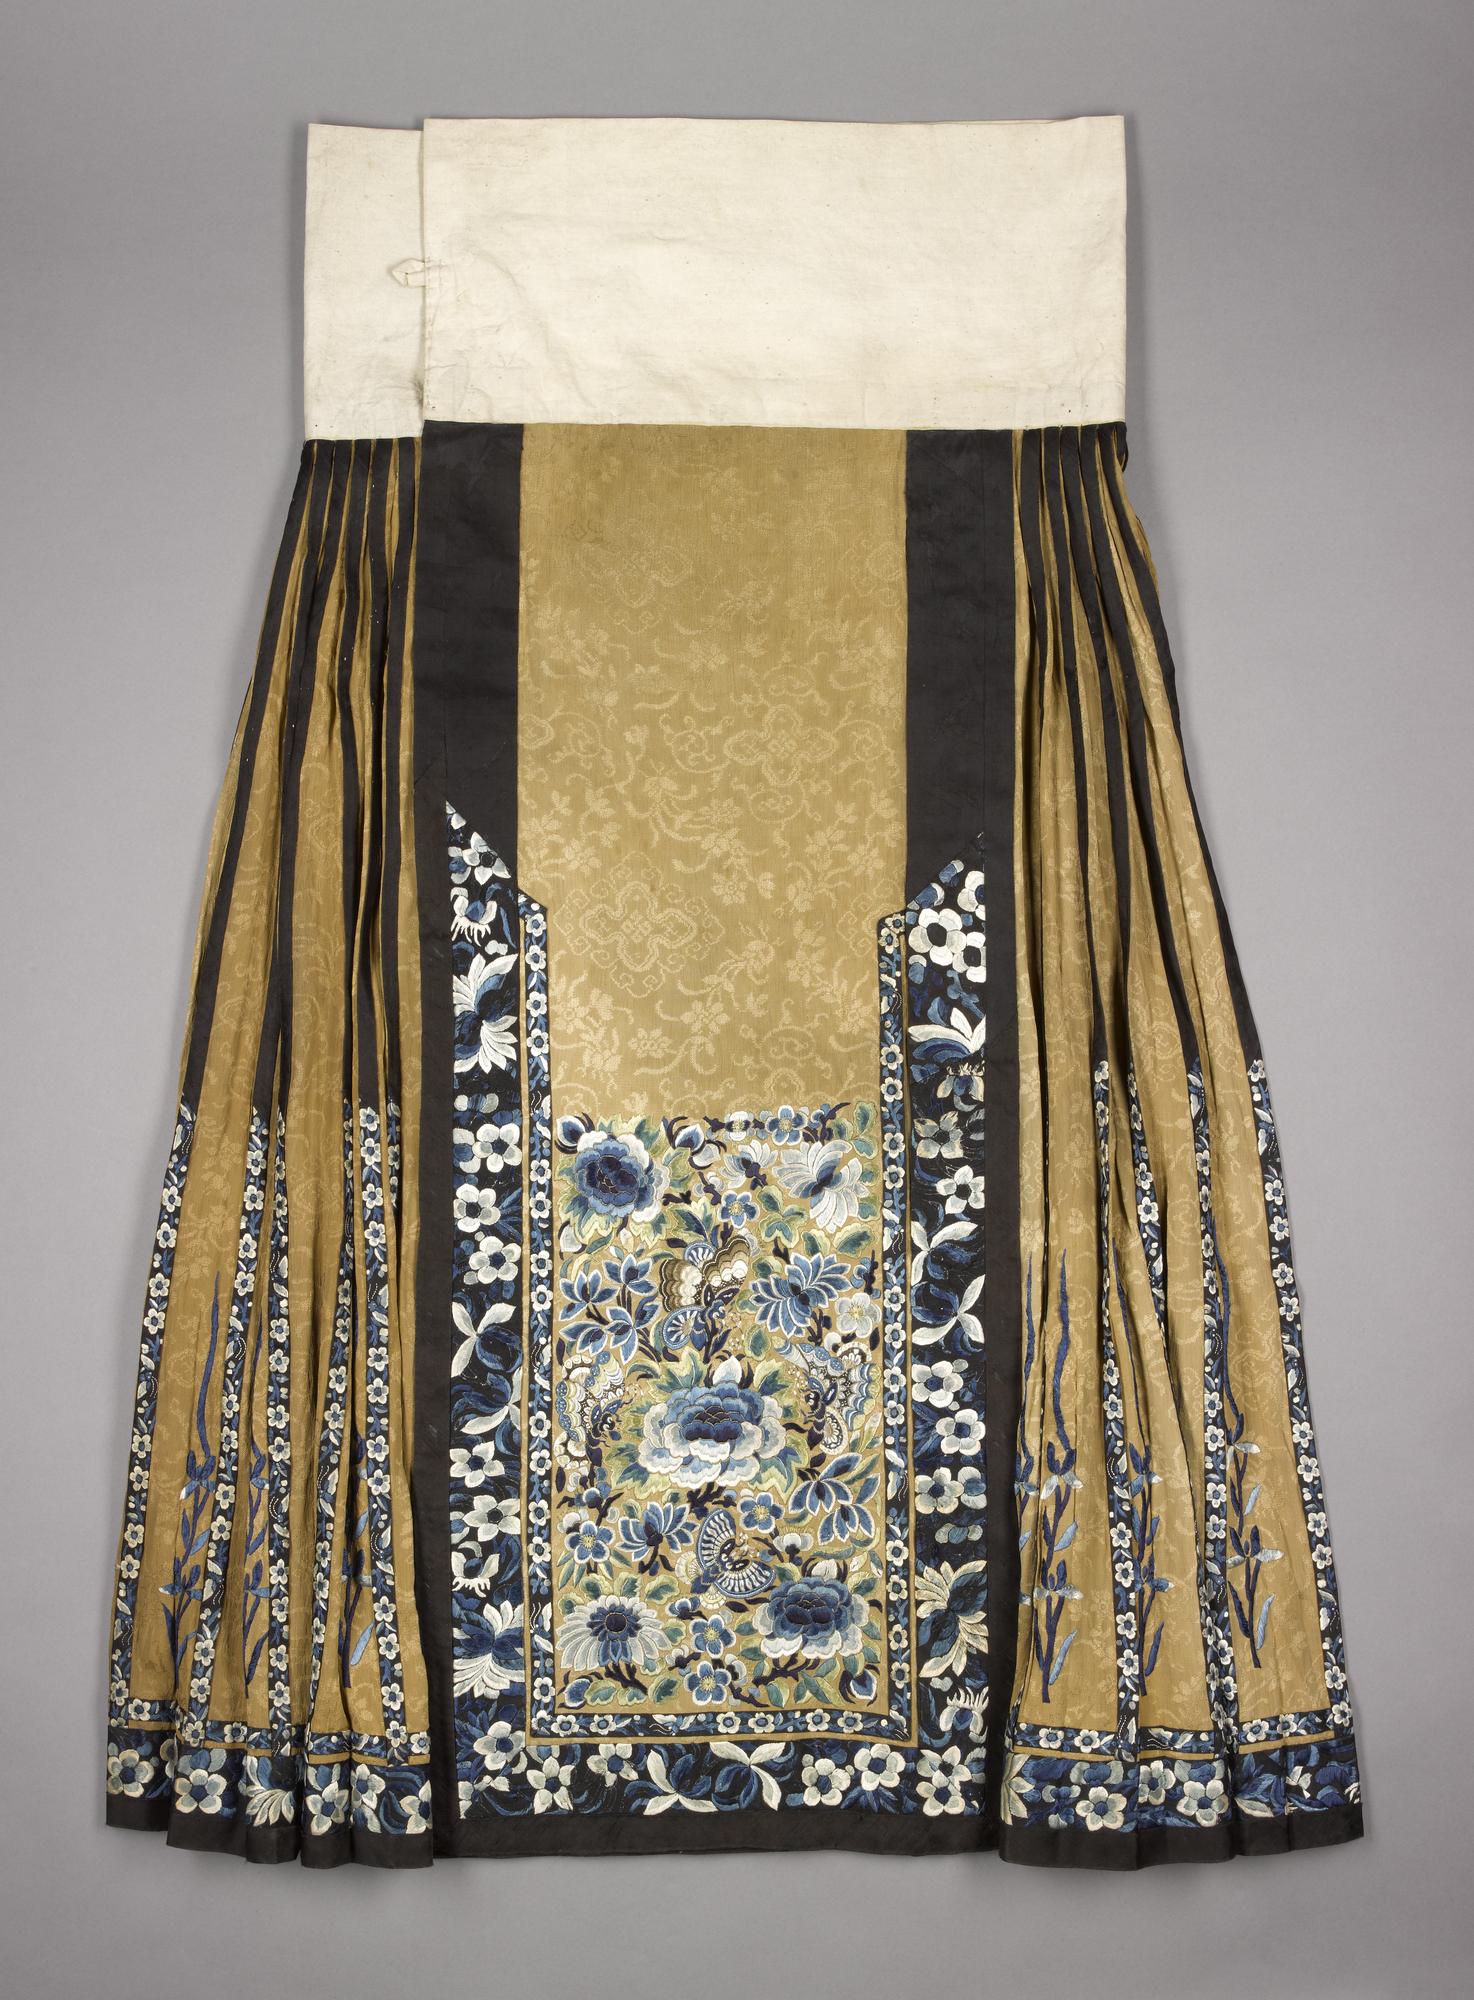 Skirt of figured silk, embroidered with a floral pattern in blue, green and white: China, Qing Dynasty, late 19th century.